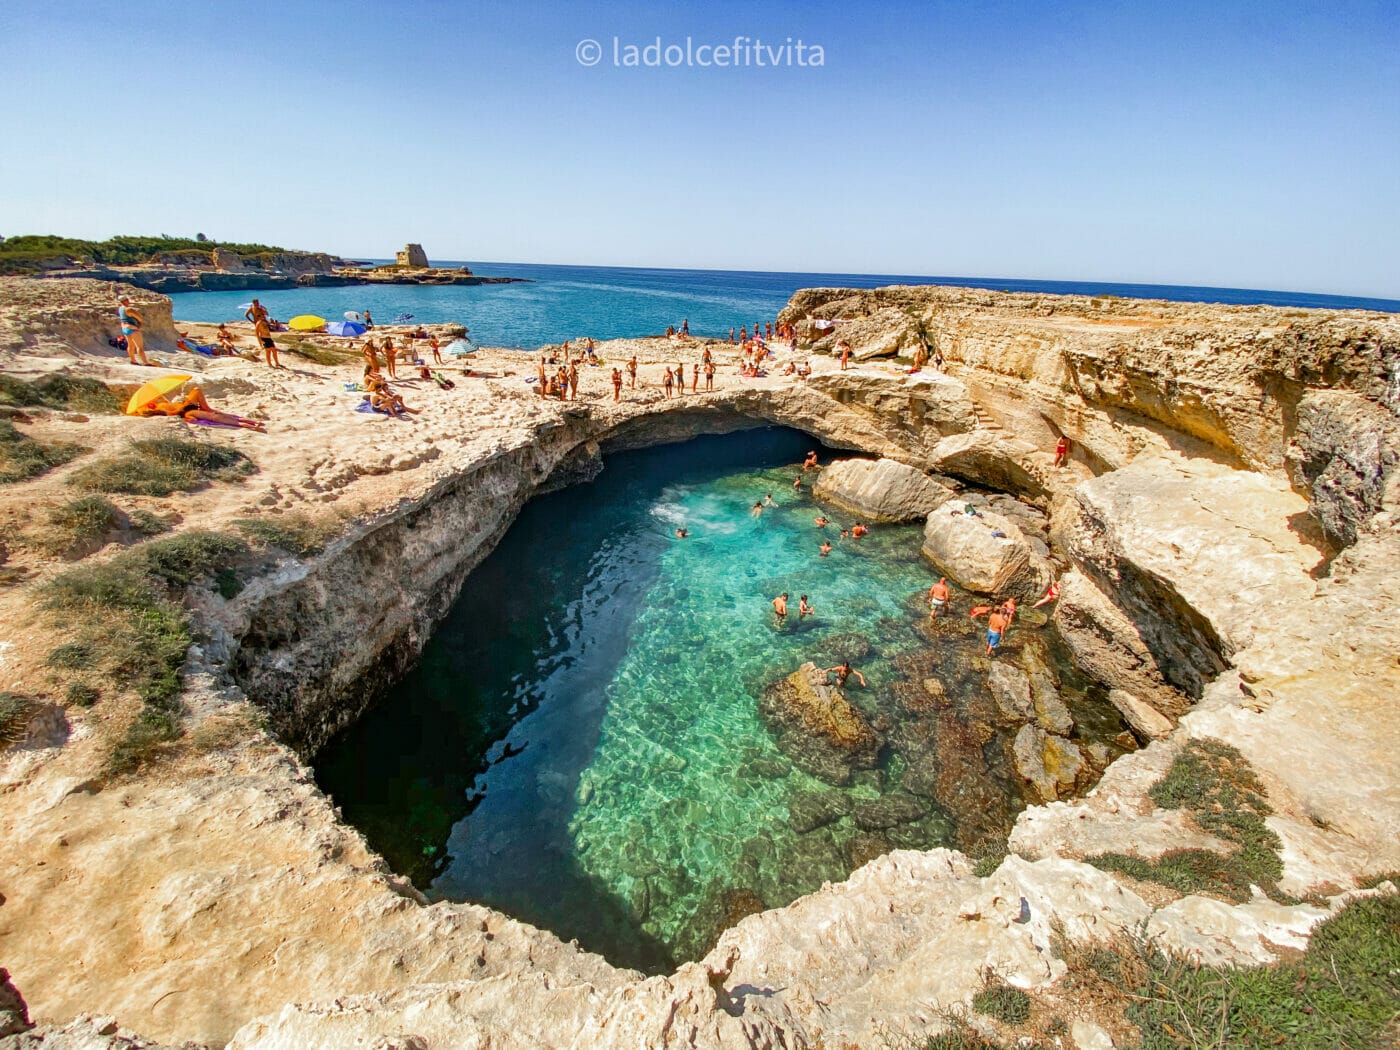 the beautiful crystalline swimming hole known as cave of poetry in southern Puglia in Italy